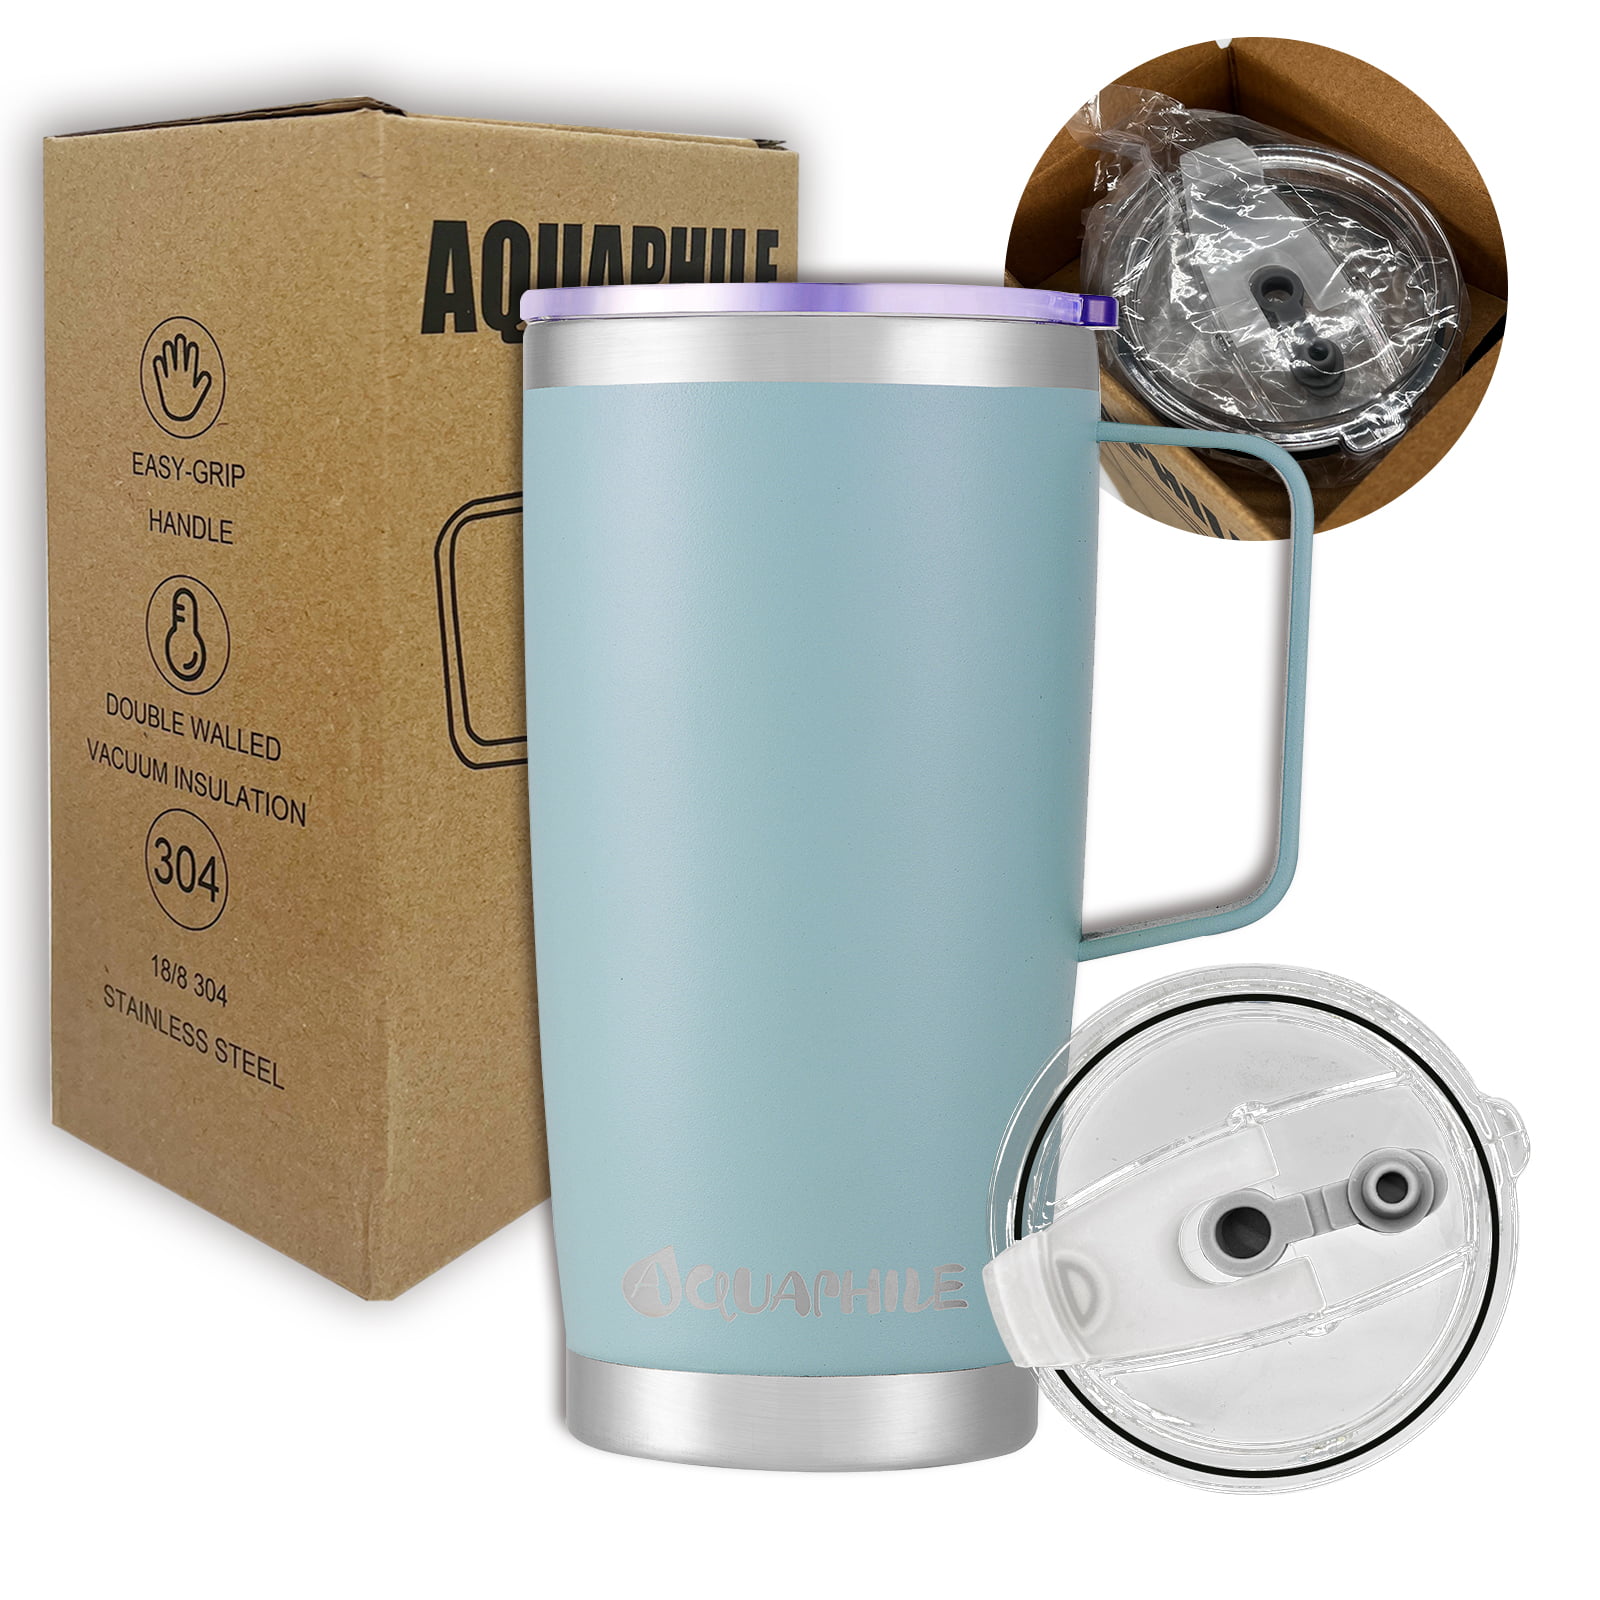 FLION Coffee Mug Spill Proof 22oz, Reusable Coffee Tumbler Cups with Lids,  Wide Mouth Water Cups Wat…See more FLION Coffee Mug Spill Proof 22oz